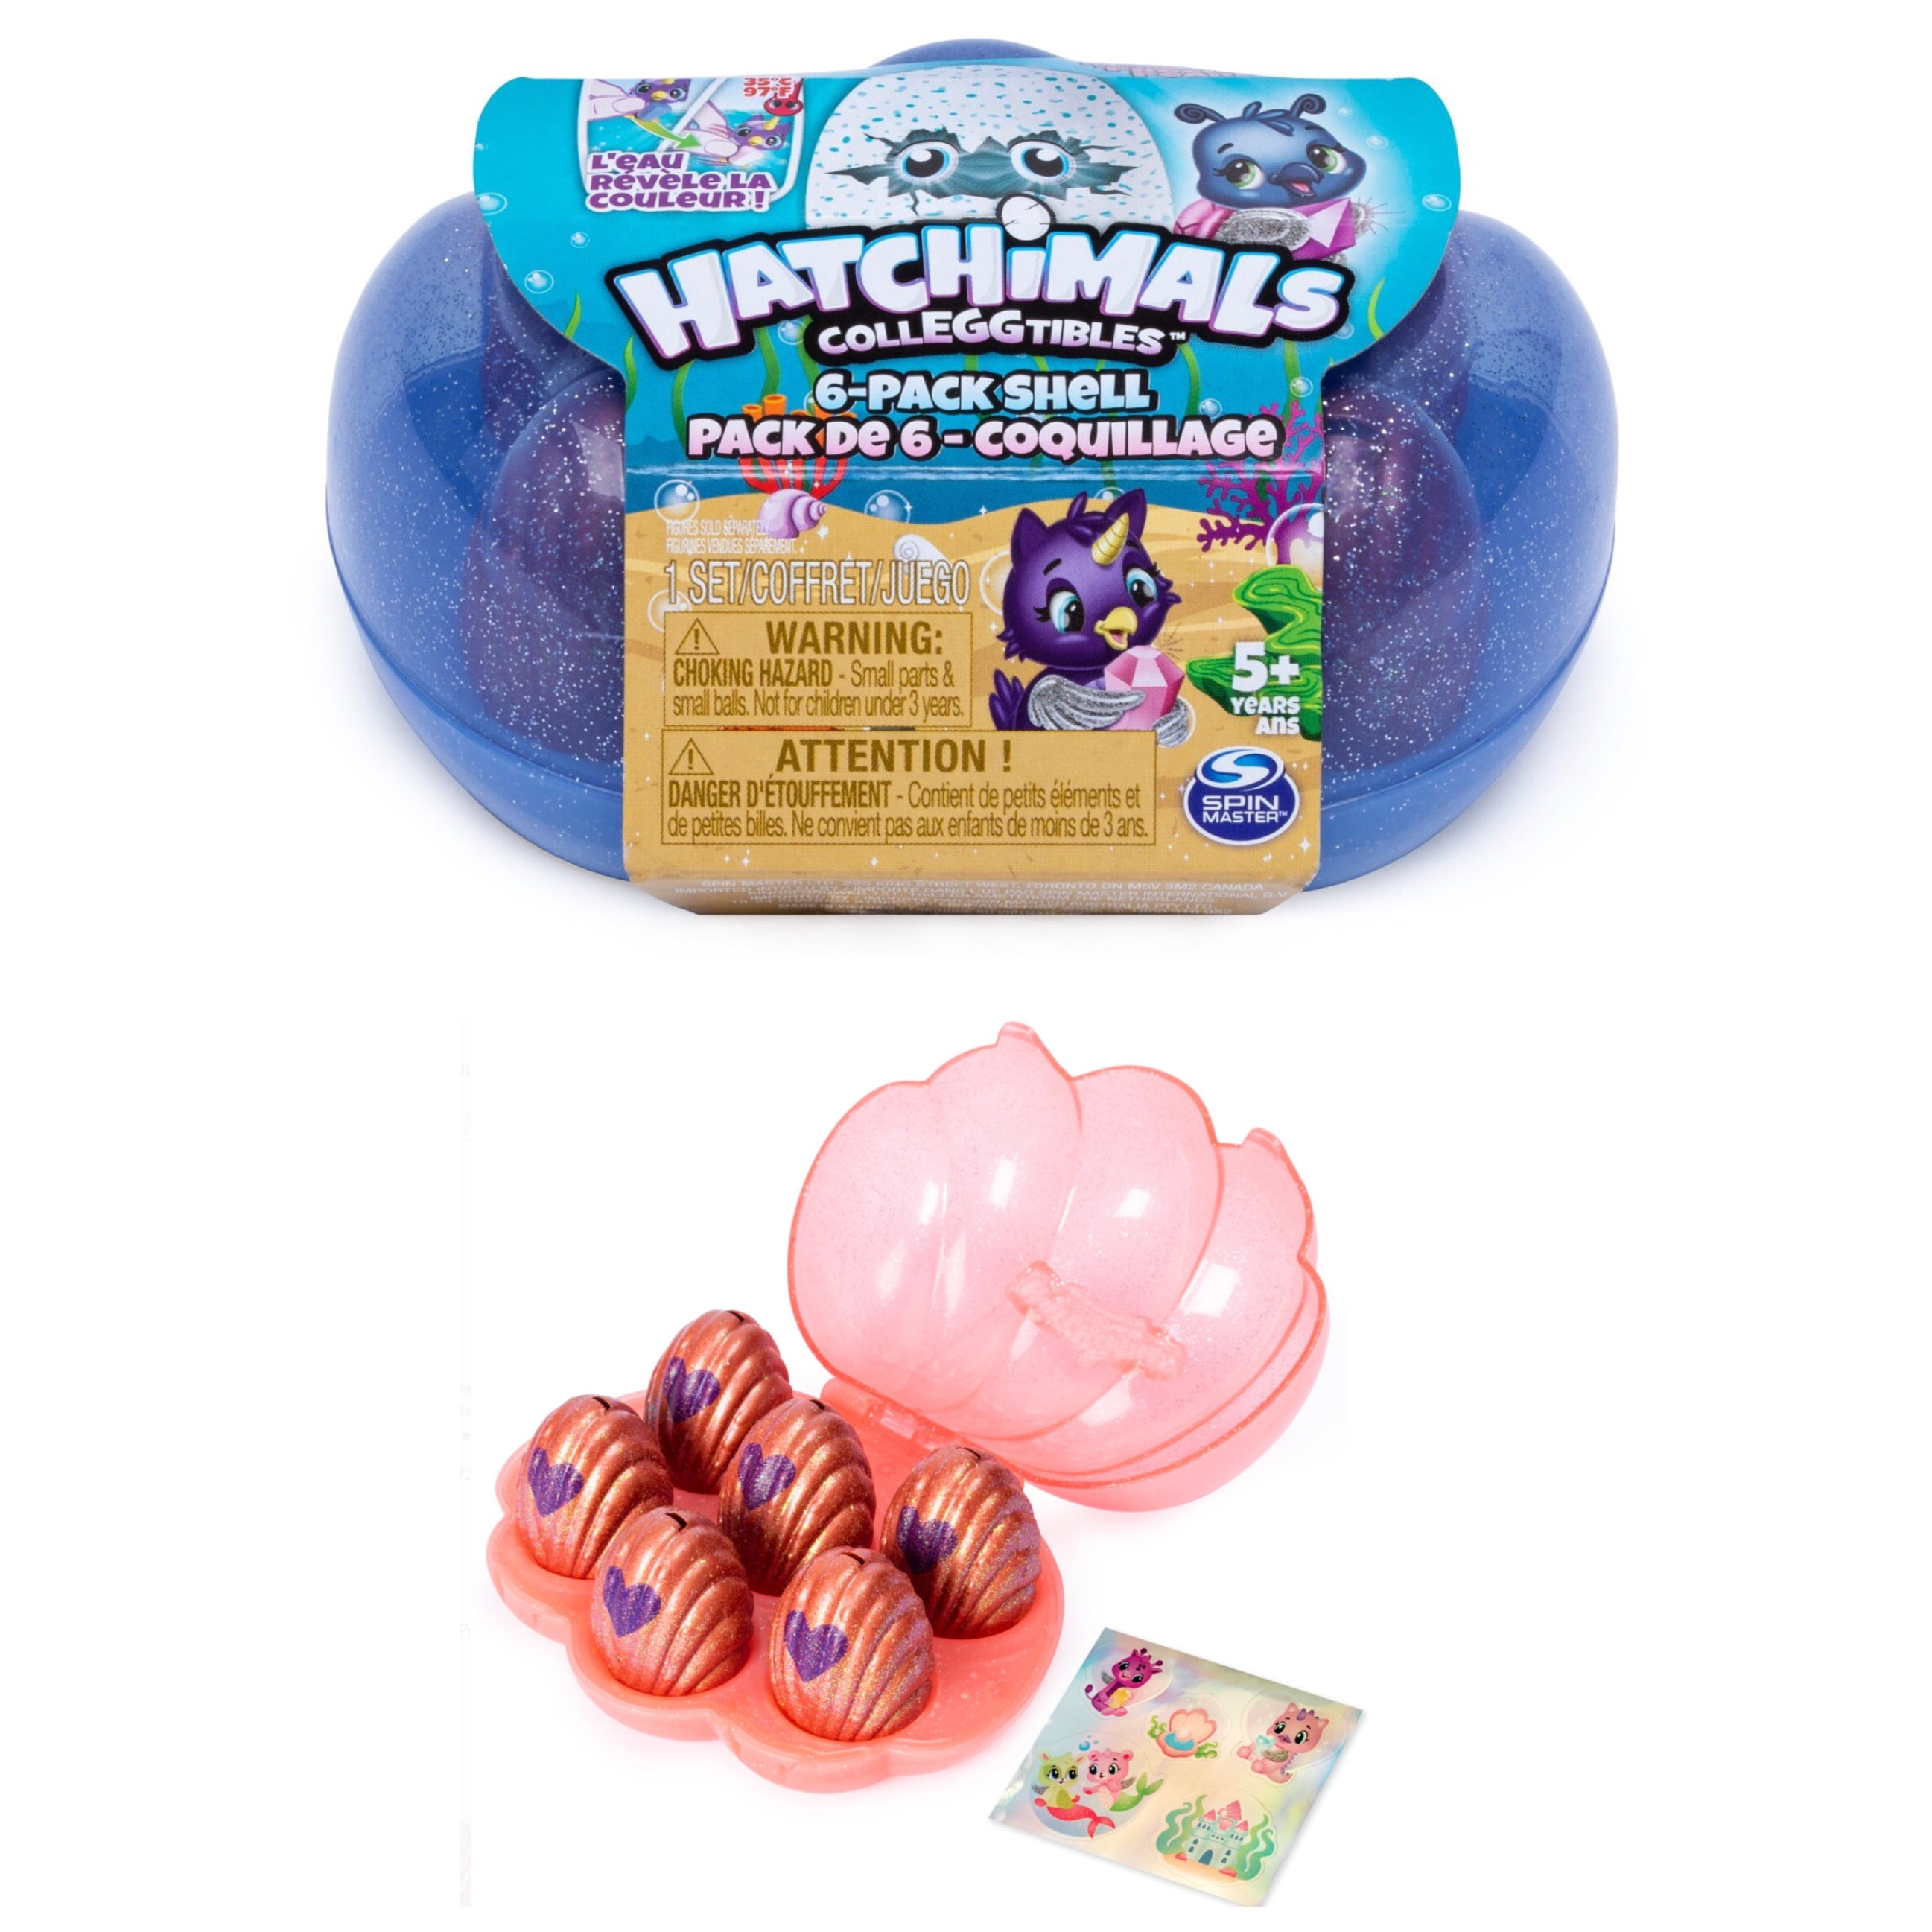 Hatchimals "Colleggtibles with Nest" Playset Popular Kids Toy Pack of 2 